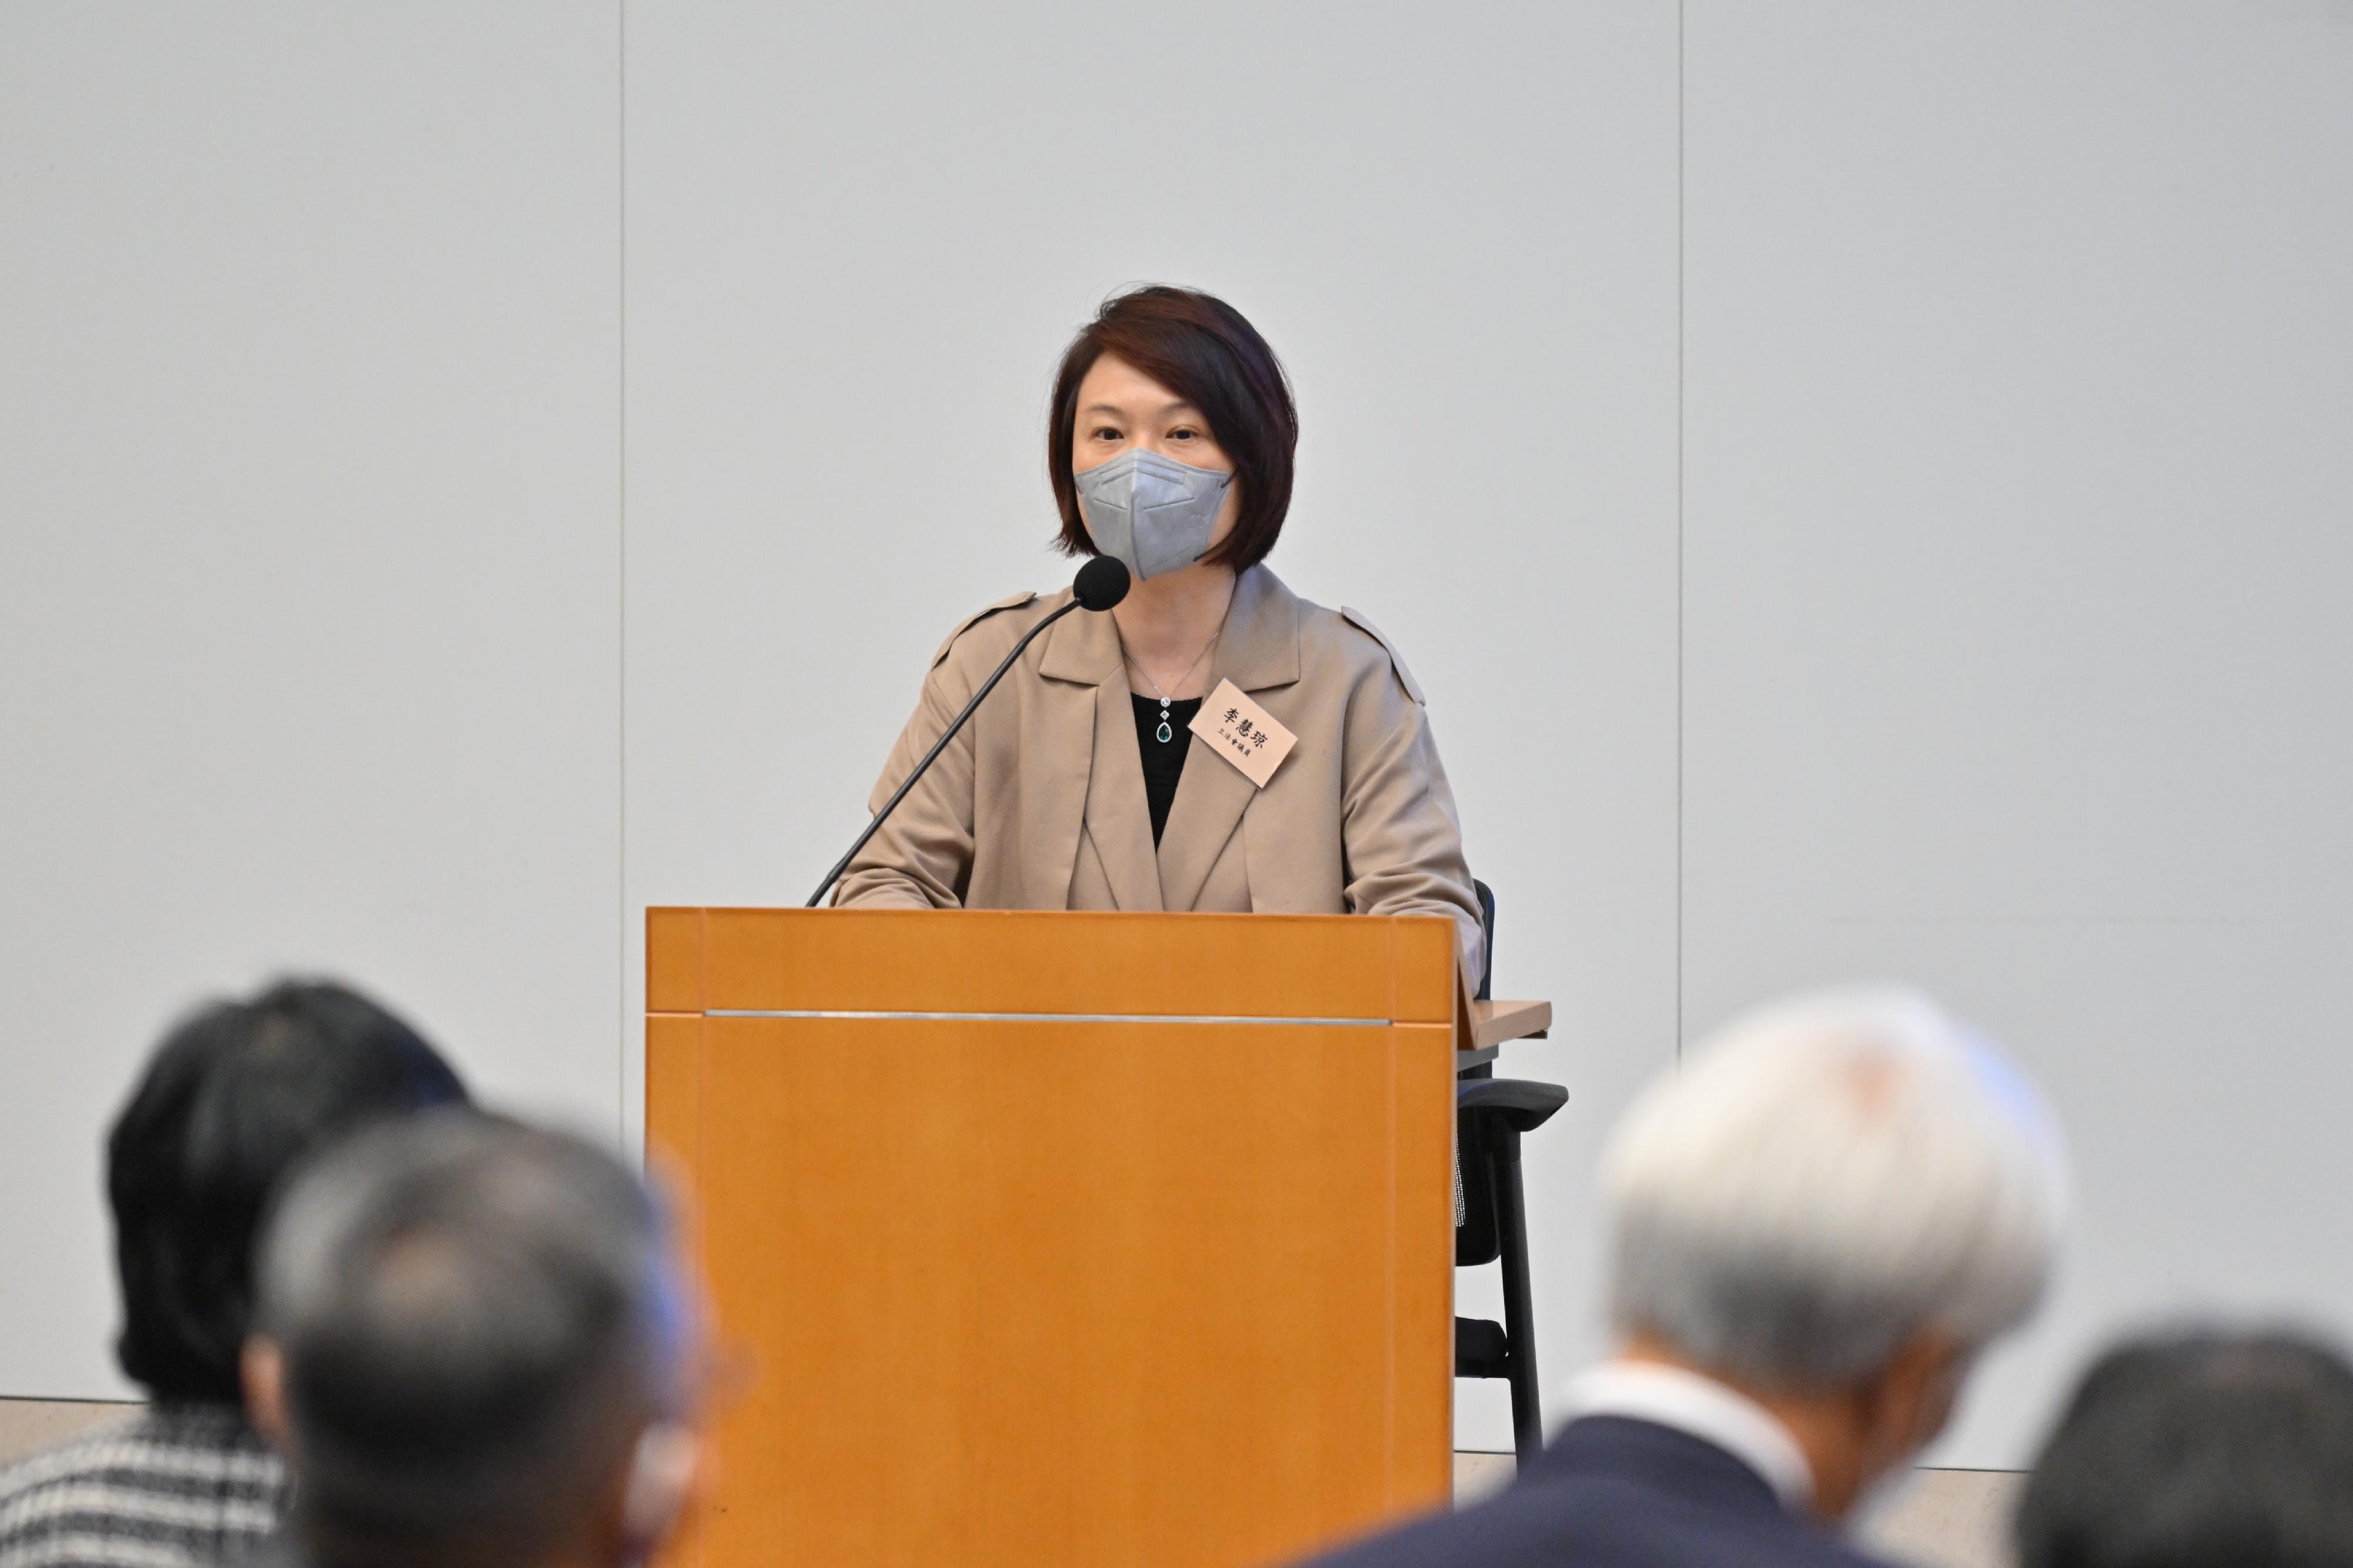 The Hong Kong Special Administrative Region Government today (November 16) held a sharing session on the spirit of the 20th National Congress of the Communist Party of China at the Central Government Offices. Photo shows Legislative Council Member Ms Starry Lee sharing her views.